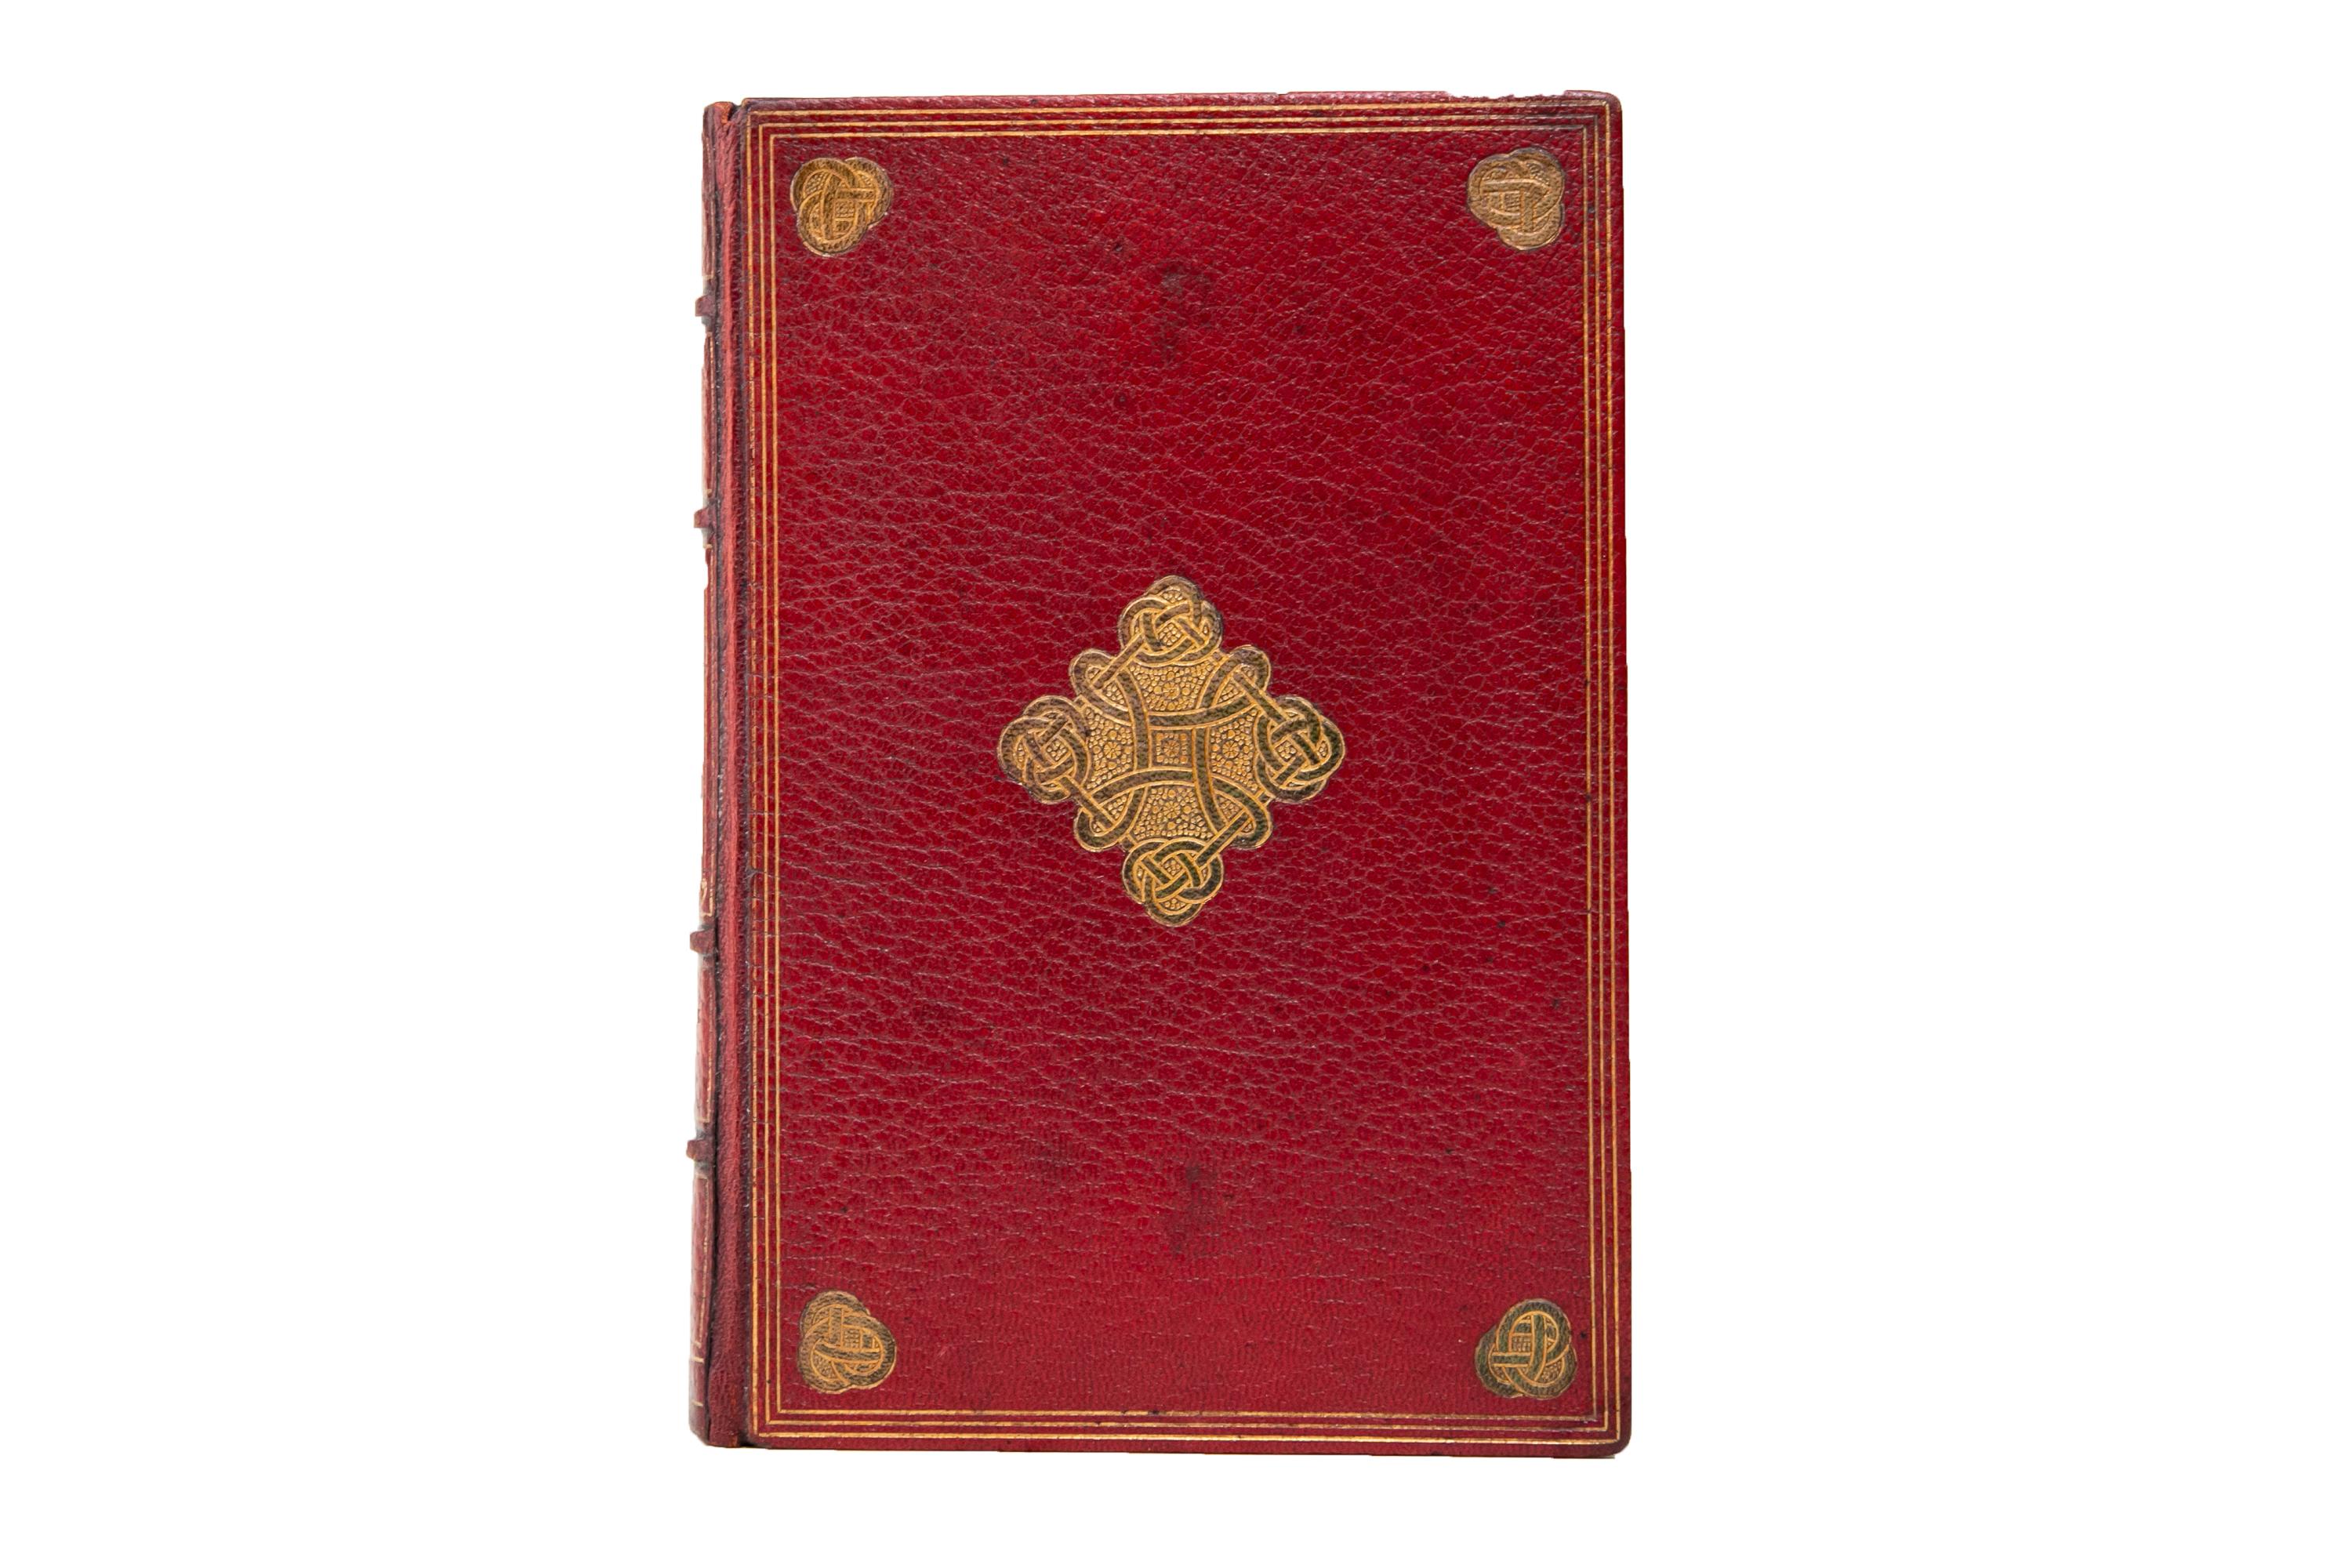 40 Volumes. Washington Irving, The Works. Joseph Jefferson Edition. Bound in full red morocco with the covers displaying bordering and ring-like details centrally and in the corners, all gilt-tooled. The spines display raised bands, ring and floral